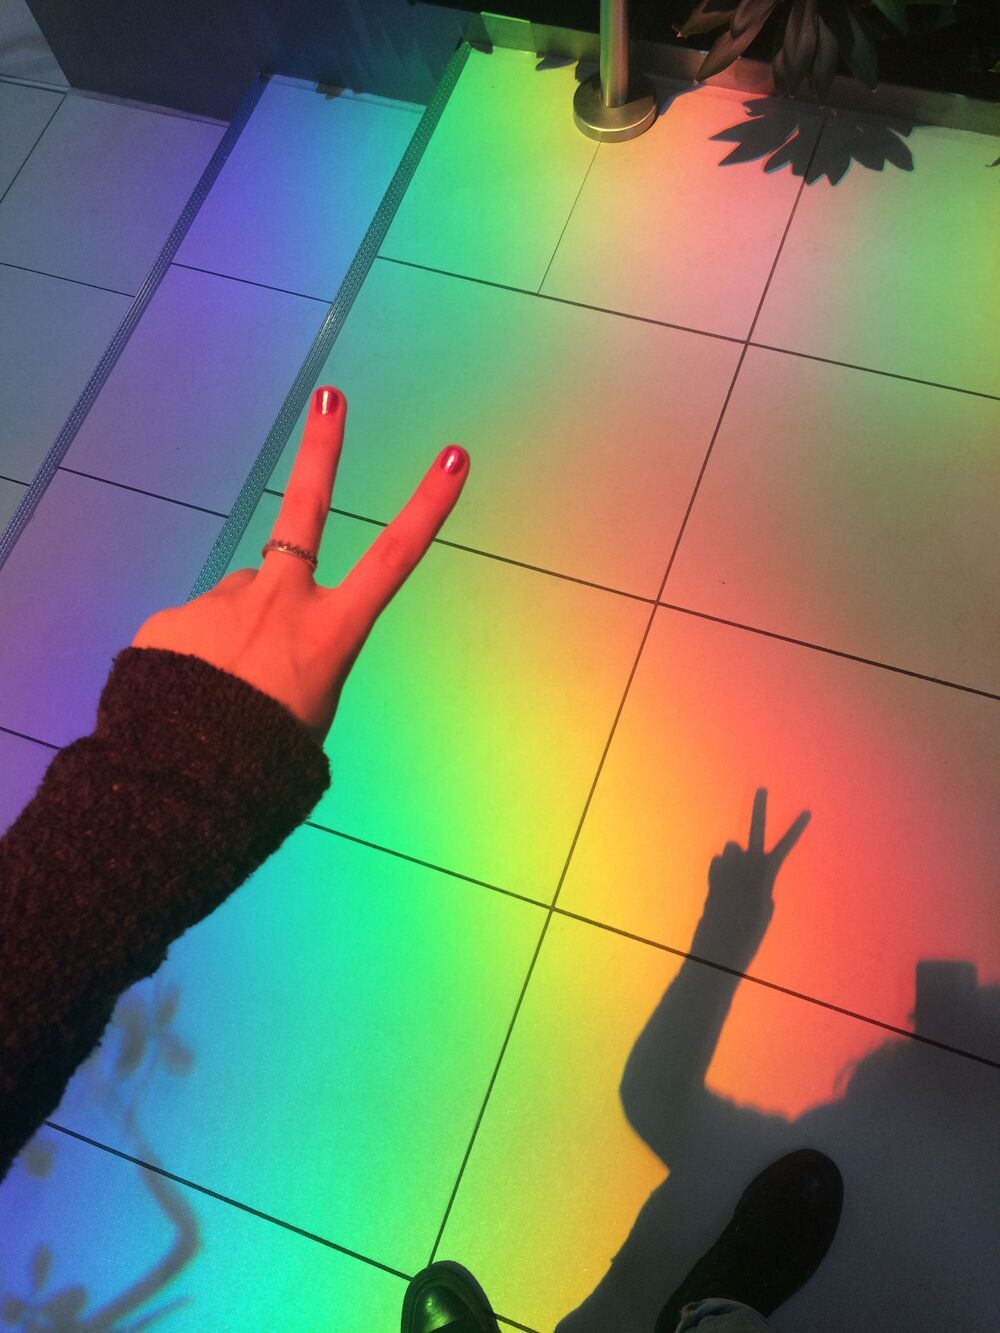 A person is making the peace sign on top of some colored tiles - Rainbows